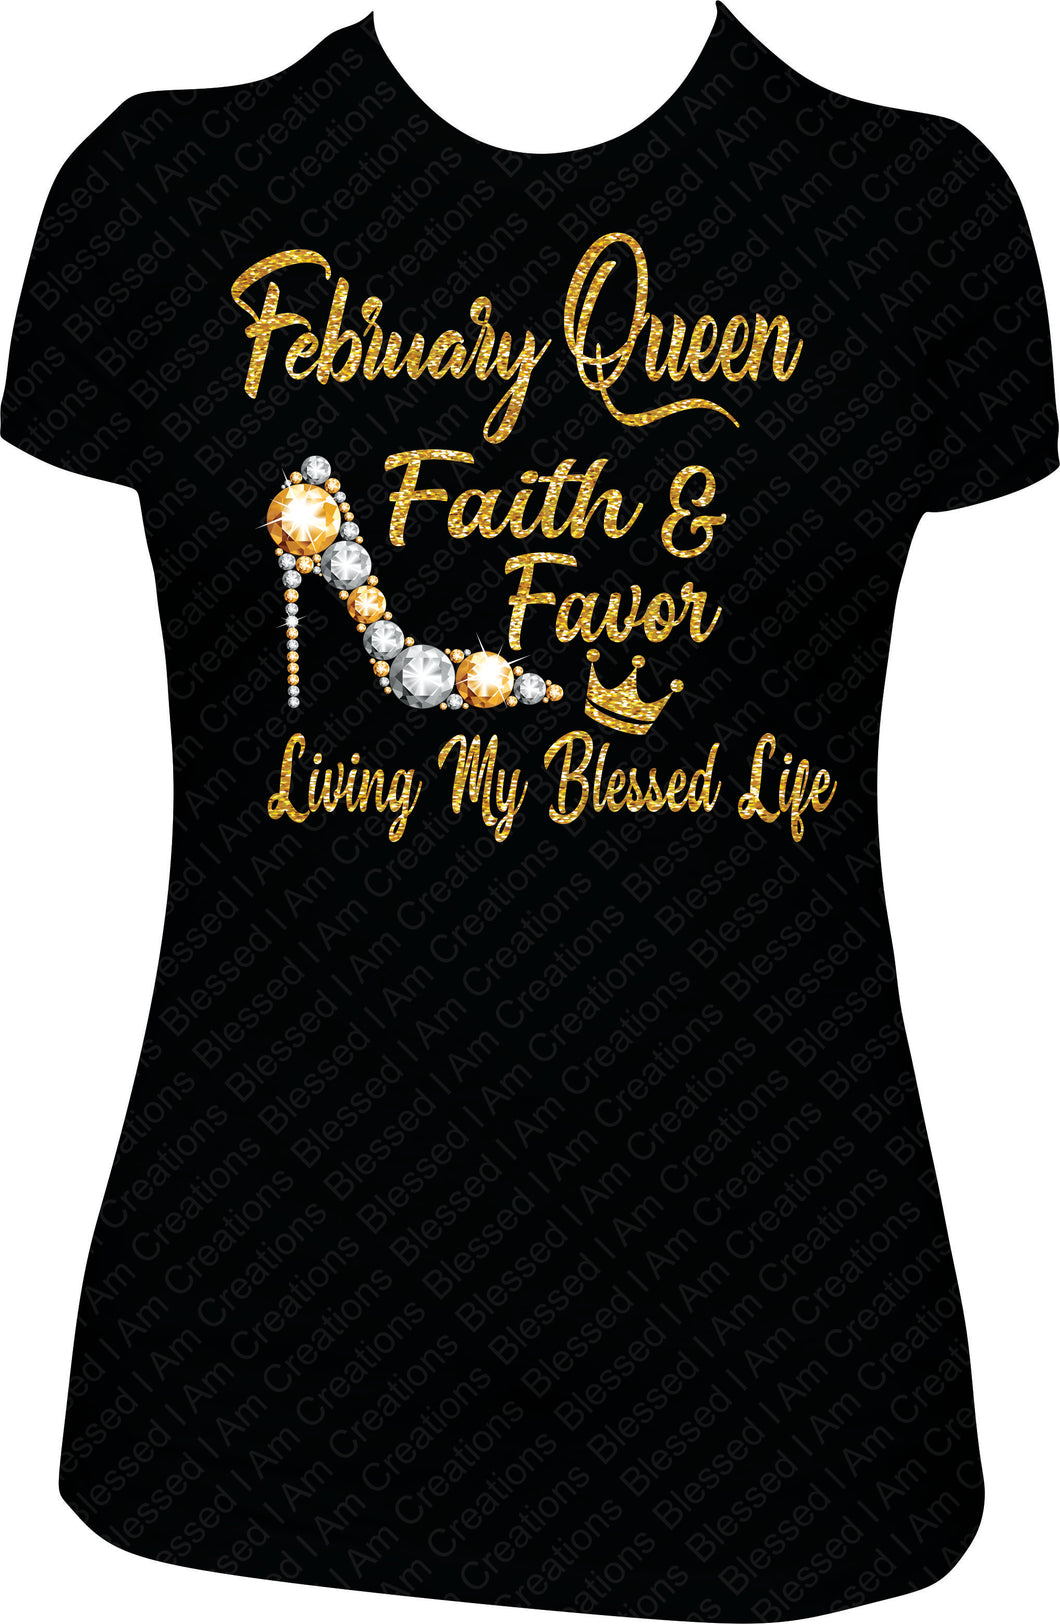 February Queen Faith and Favor Living My Blessed Life Birthday Shirt